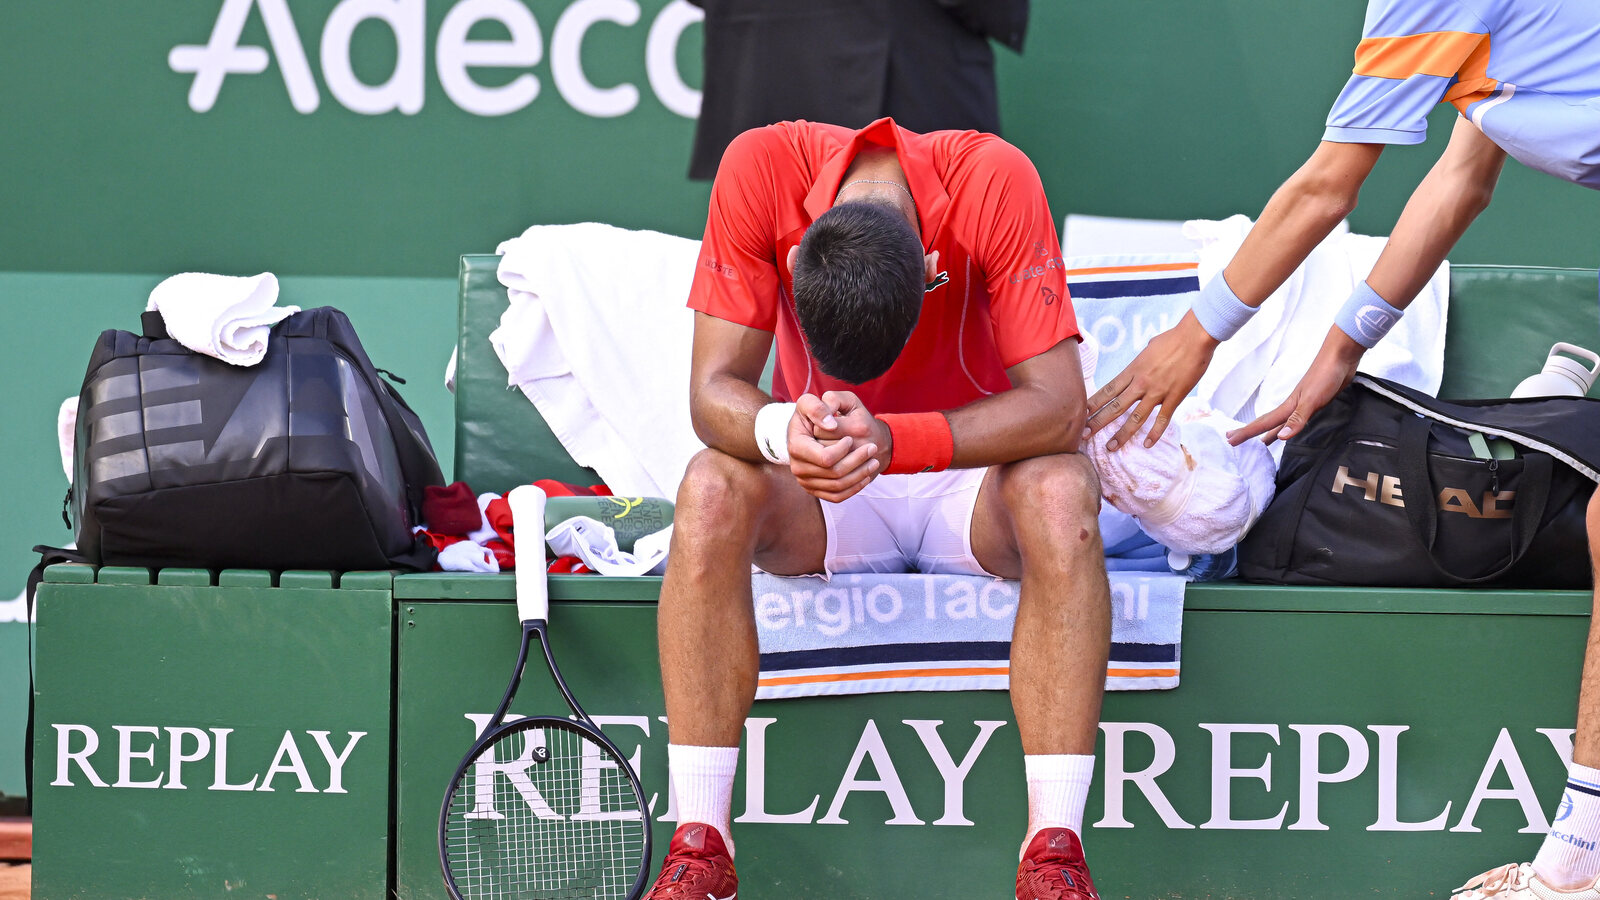 'He was searching for something the whole week:' Andy Roddick analyzes Novak Djokovic’s recent string of upsets